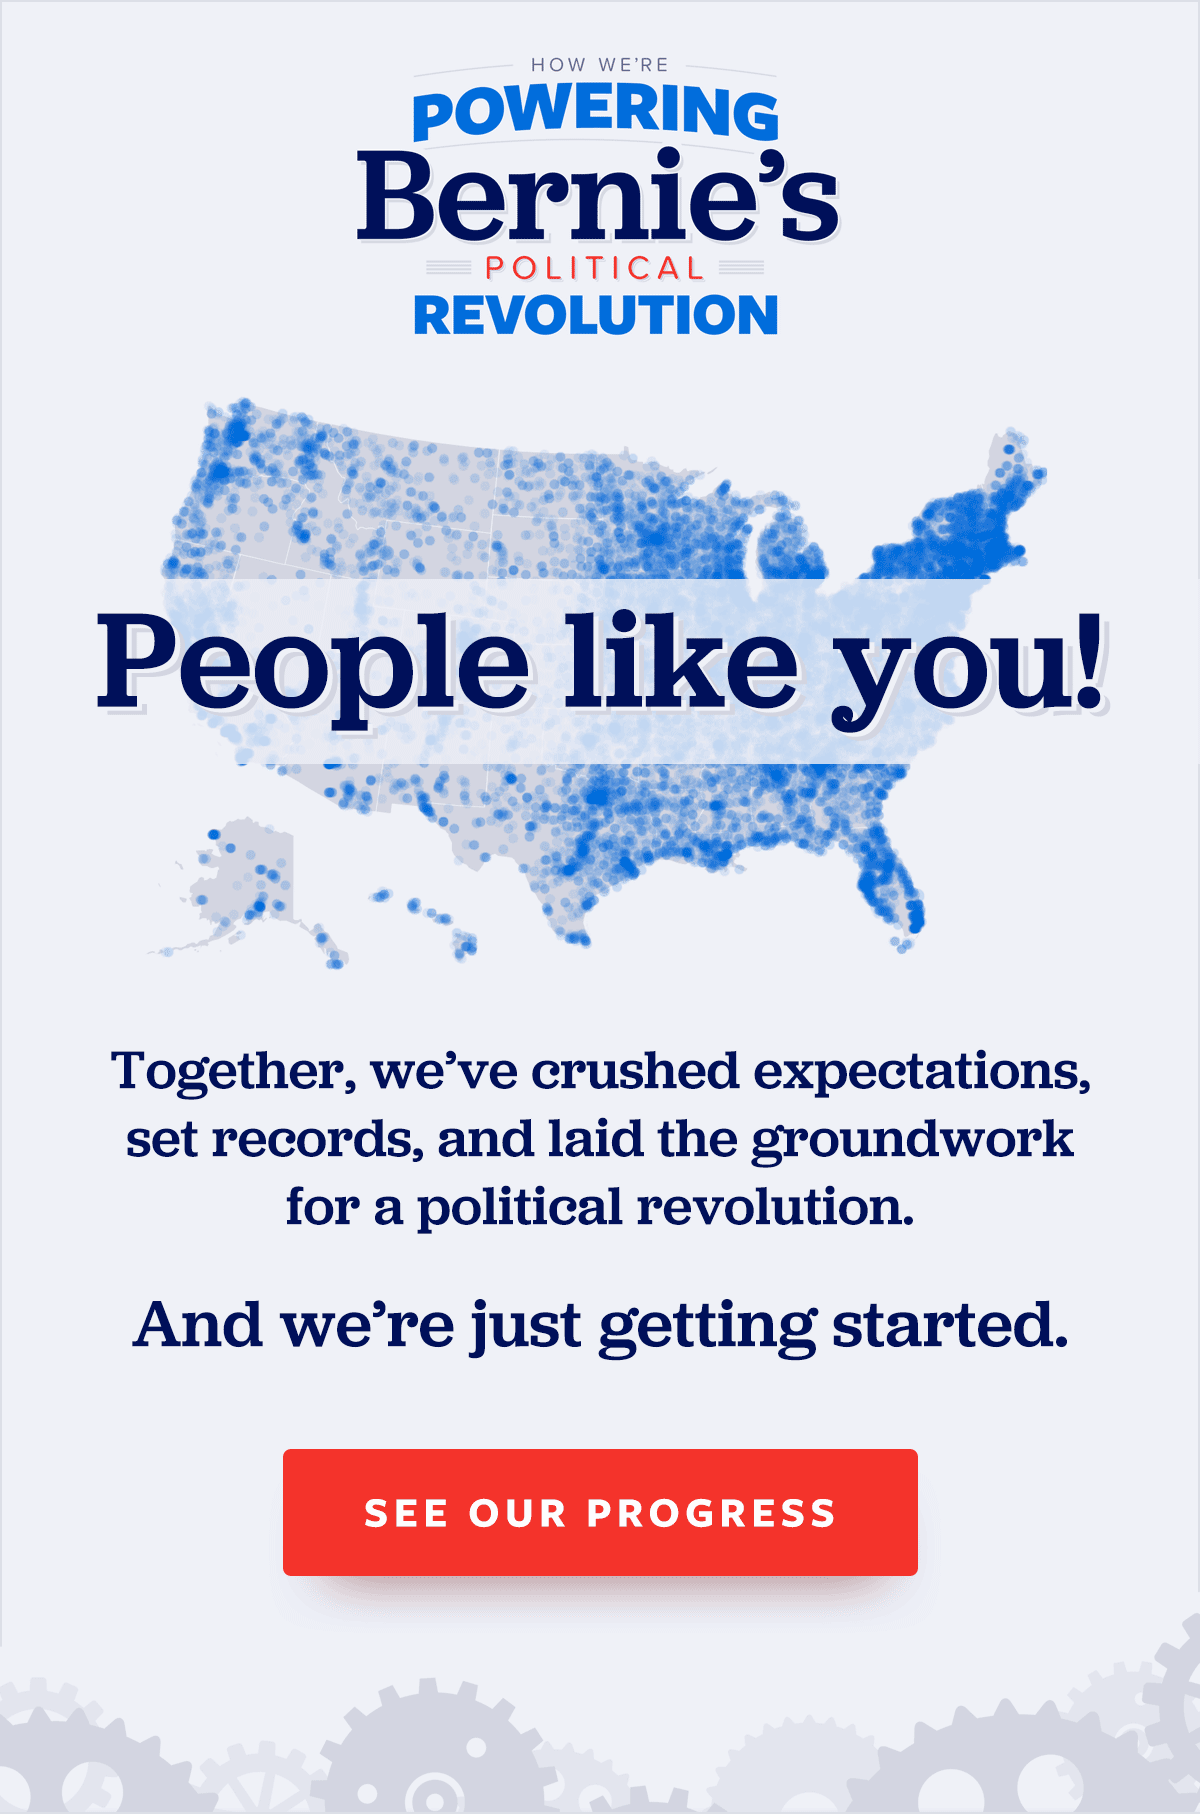 Take a look at our new website showing the depth of our political revolution